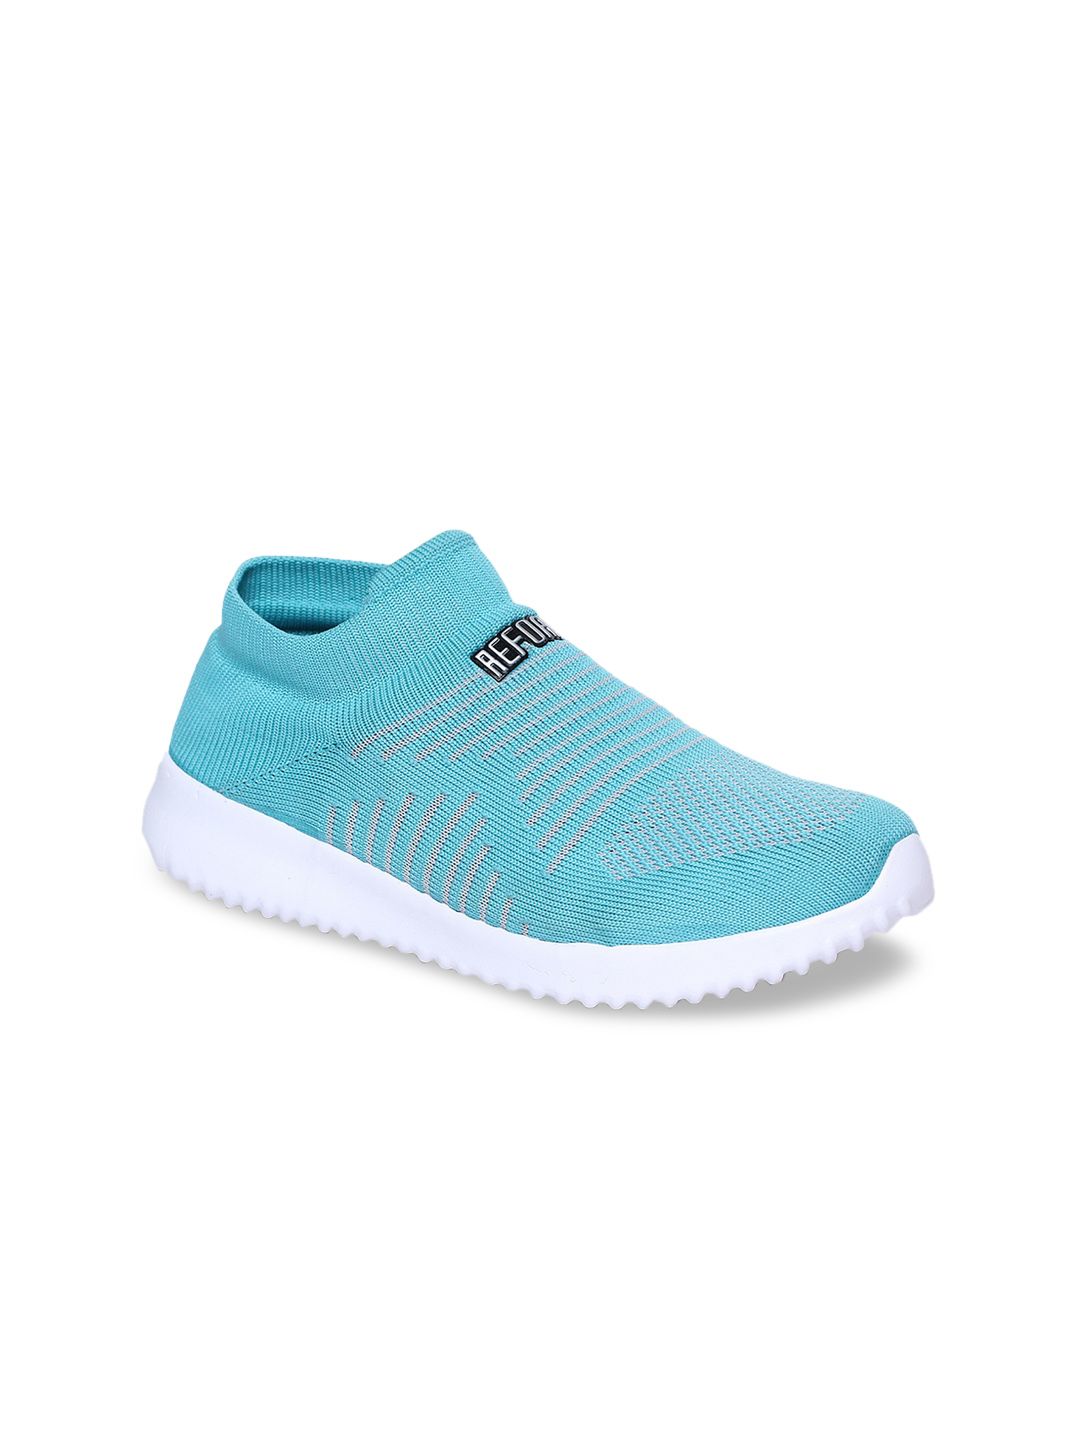 REFOAM Women Blue Mesh Running Shoes Price in India